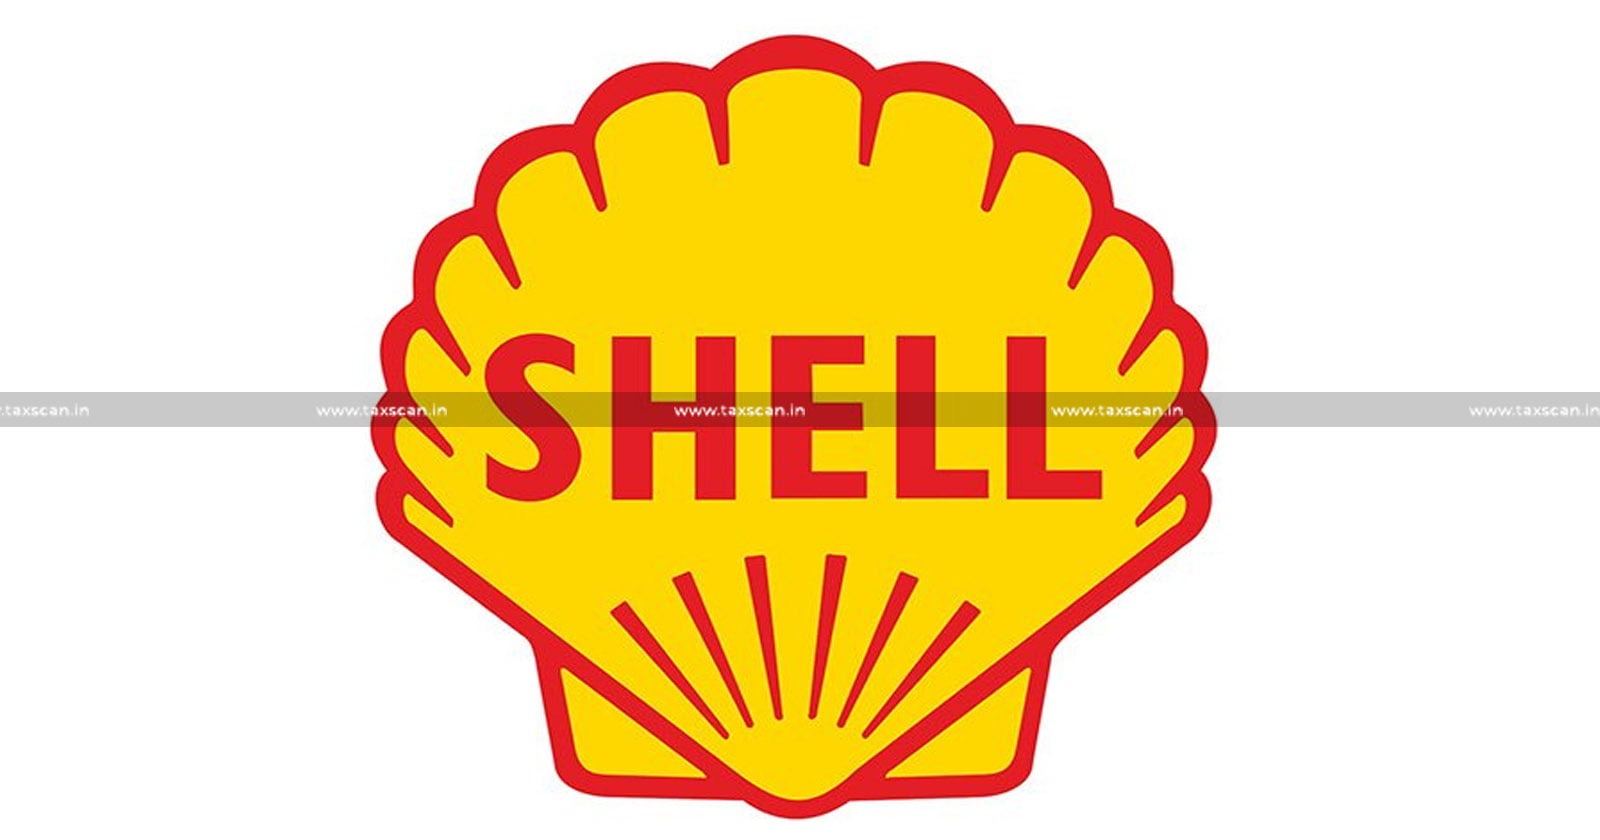 ca careers in shell - ca vacancy in shell - ca job opportunities in shell - ca jobs in shell - shell hiring - shell careers - taxscan